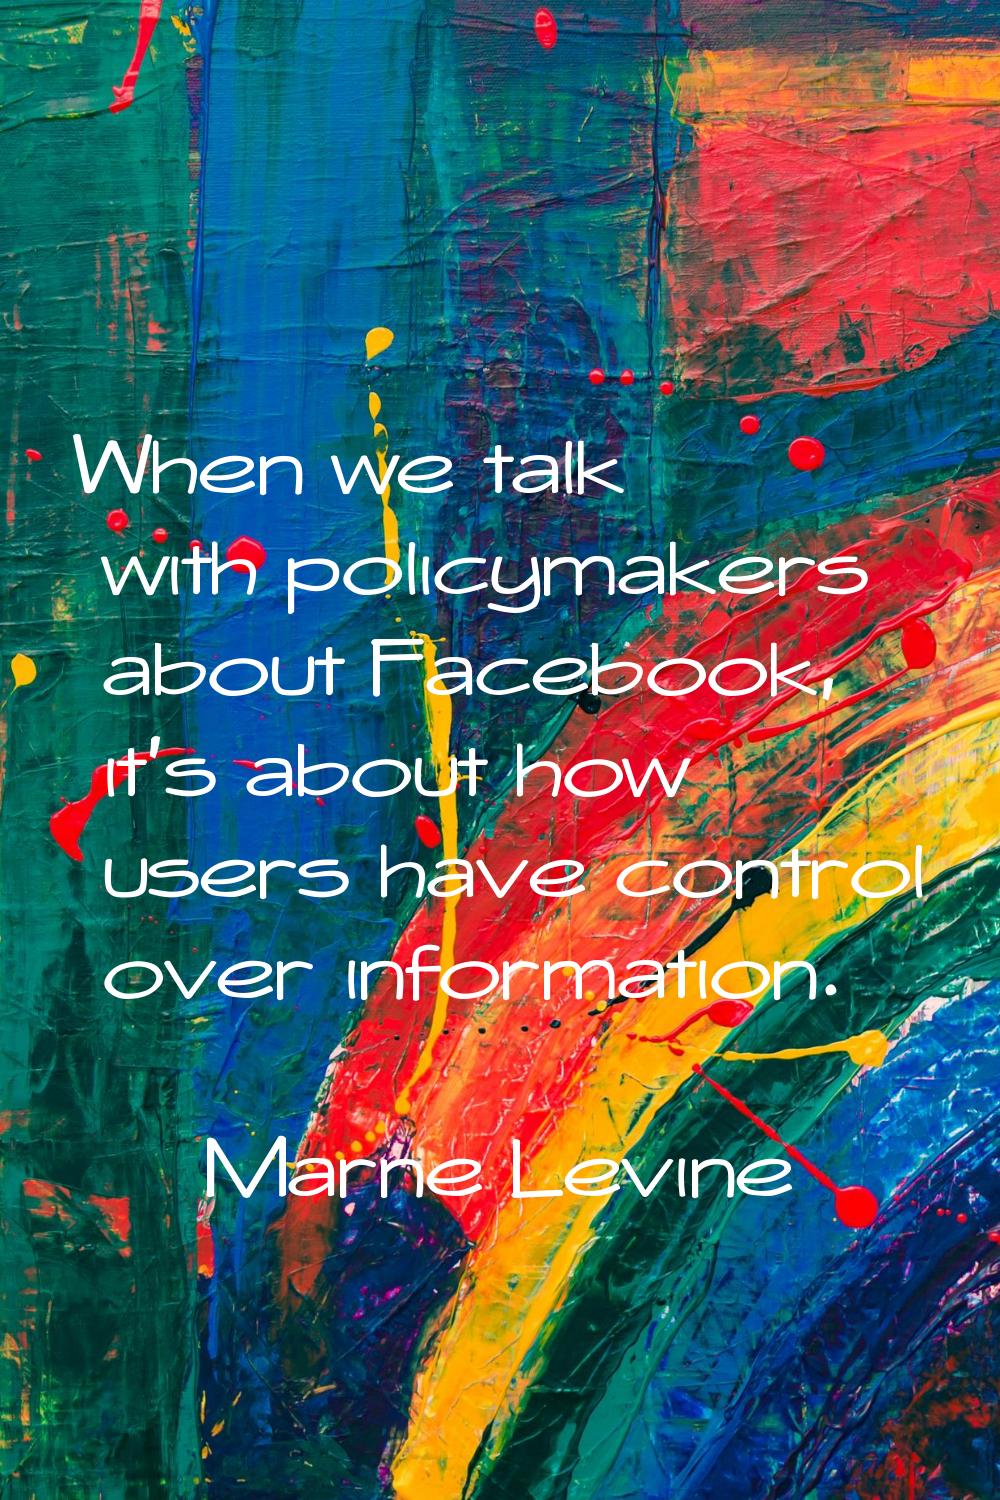 When we talk with policymakers about Facebook, it's about how users have control over information.